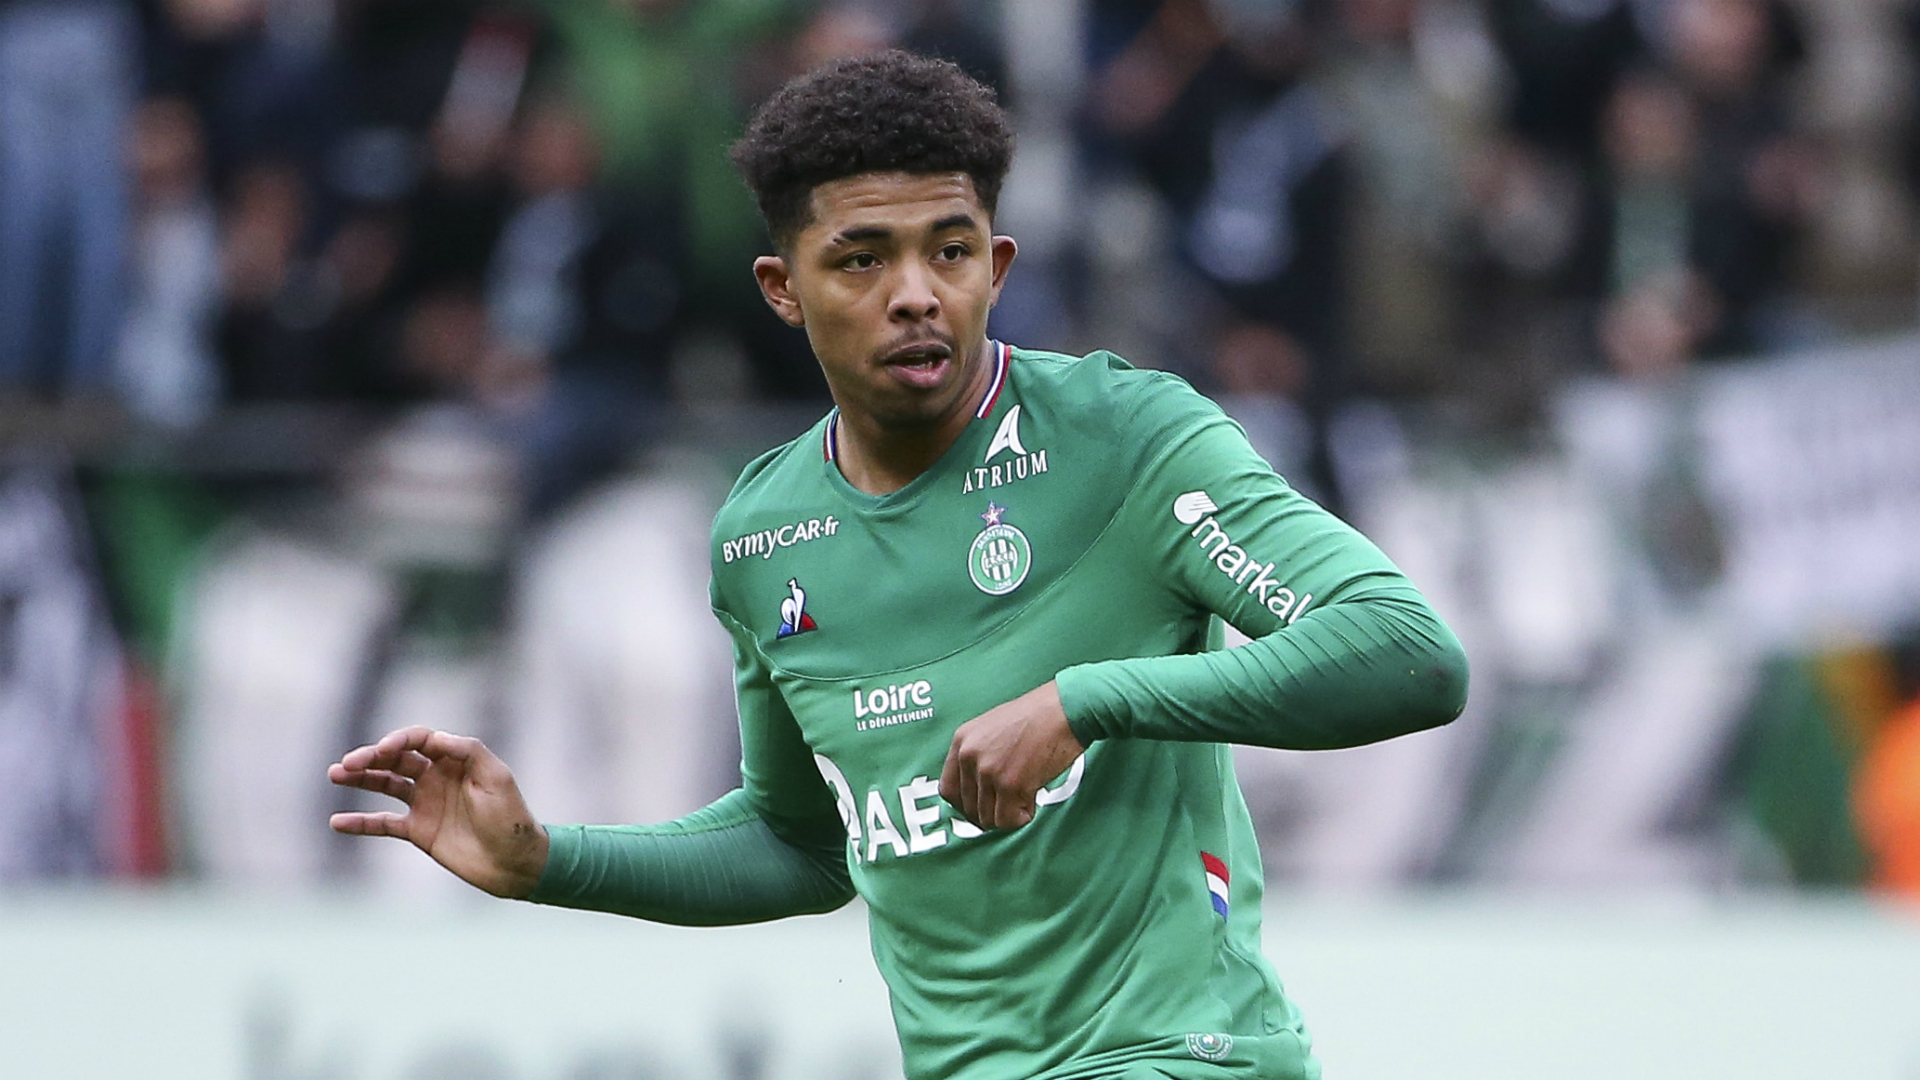 Saint-Etienne's teenage defender Wesley Fofana has caught the eye in Ligue 1 and now he is heading to Premier League side Leicester City.